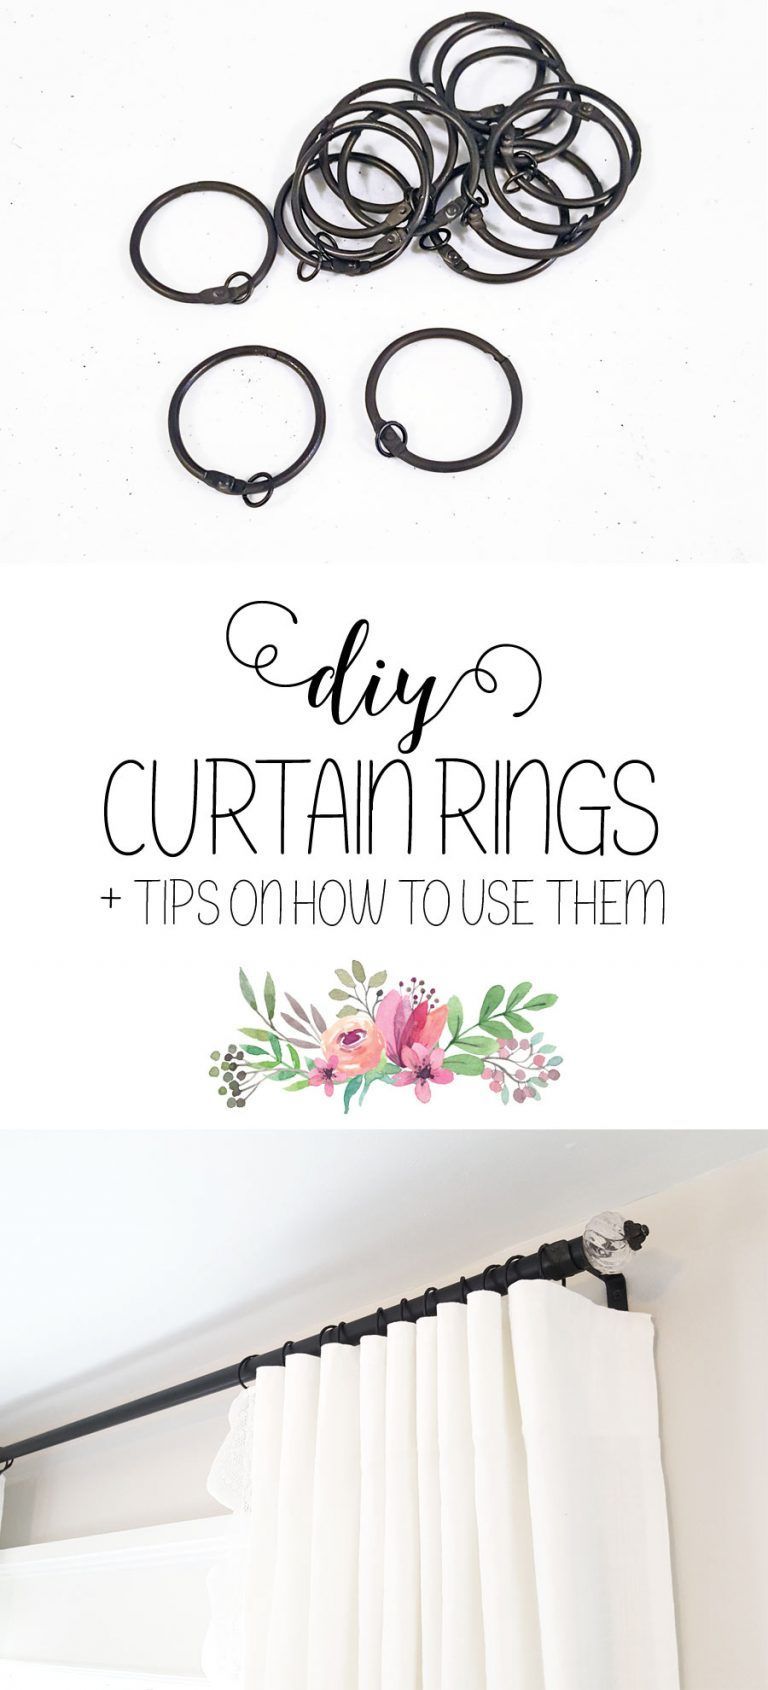 Get a Designer Look for Less by Making your own DIY Curtain Rings -   25 diy curtains rings
 ideas